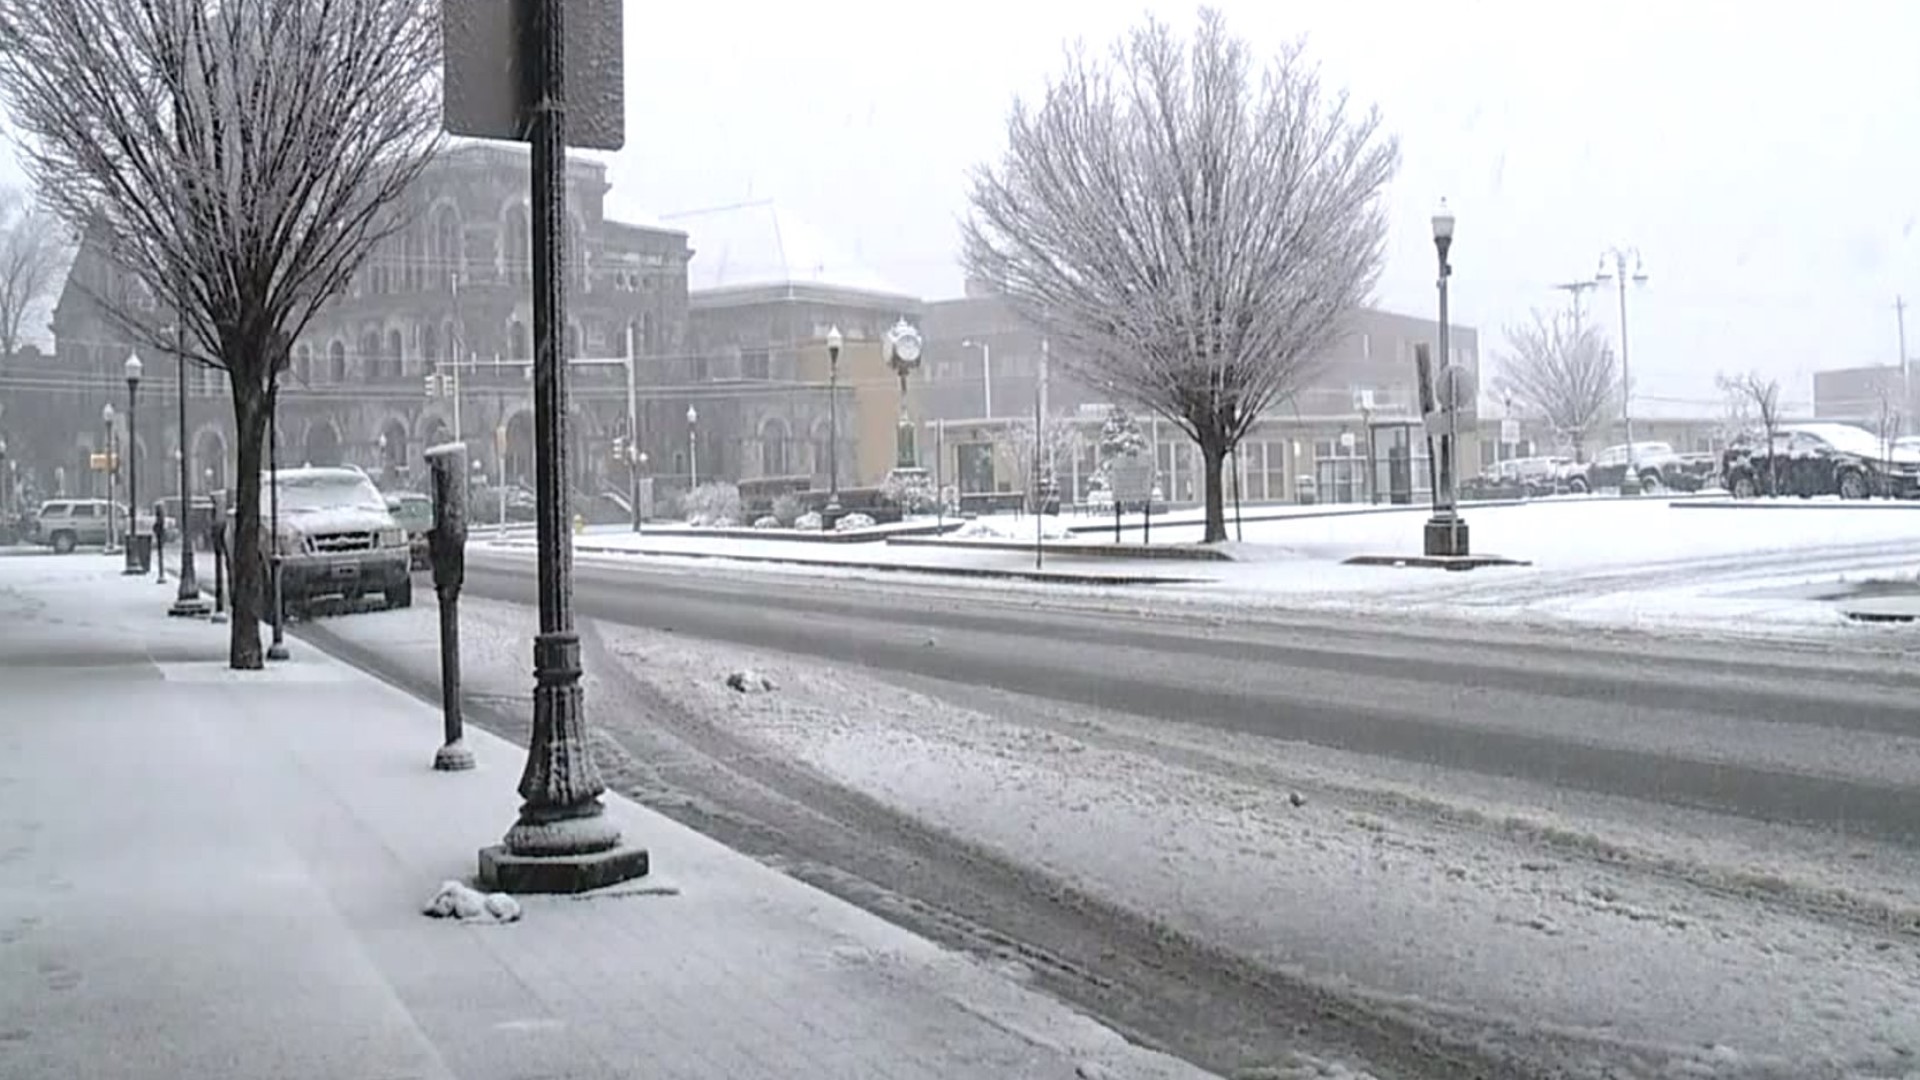 Crews in Williamsport worked around the clock to make sure the roads and sidewalks were safe for travel.